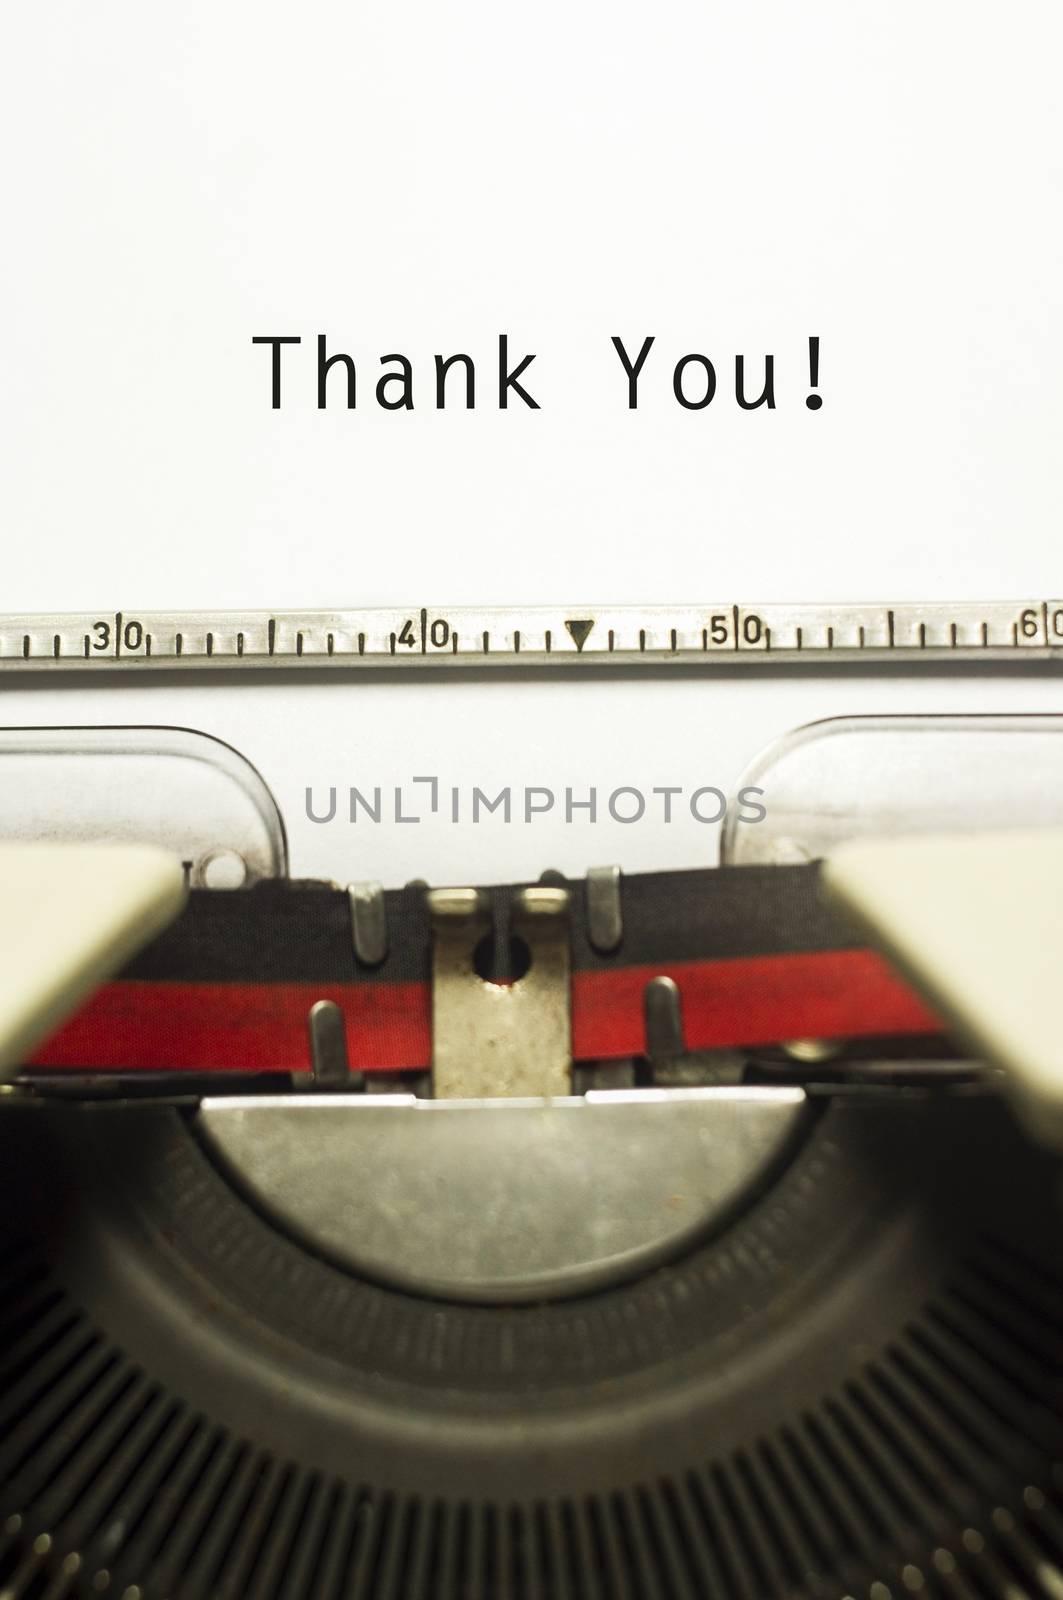 thank you message on typewriter paper, for appreciation concepts.